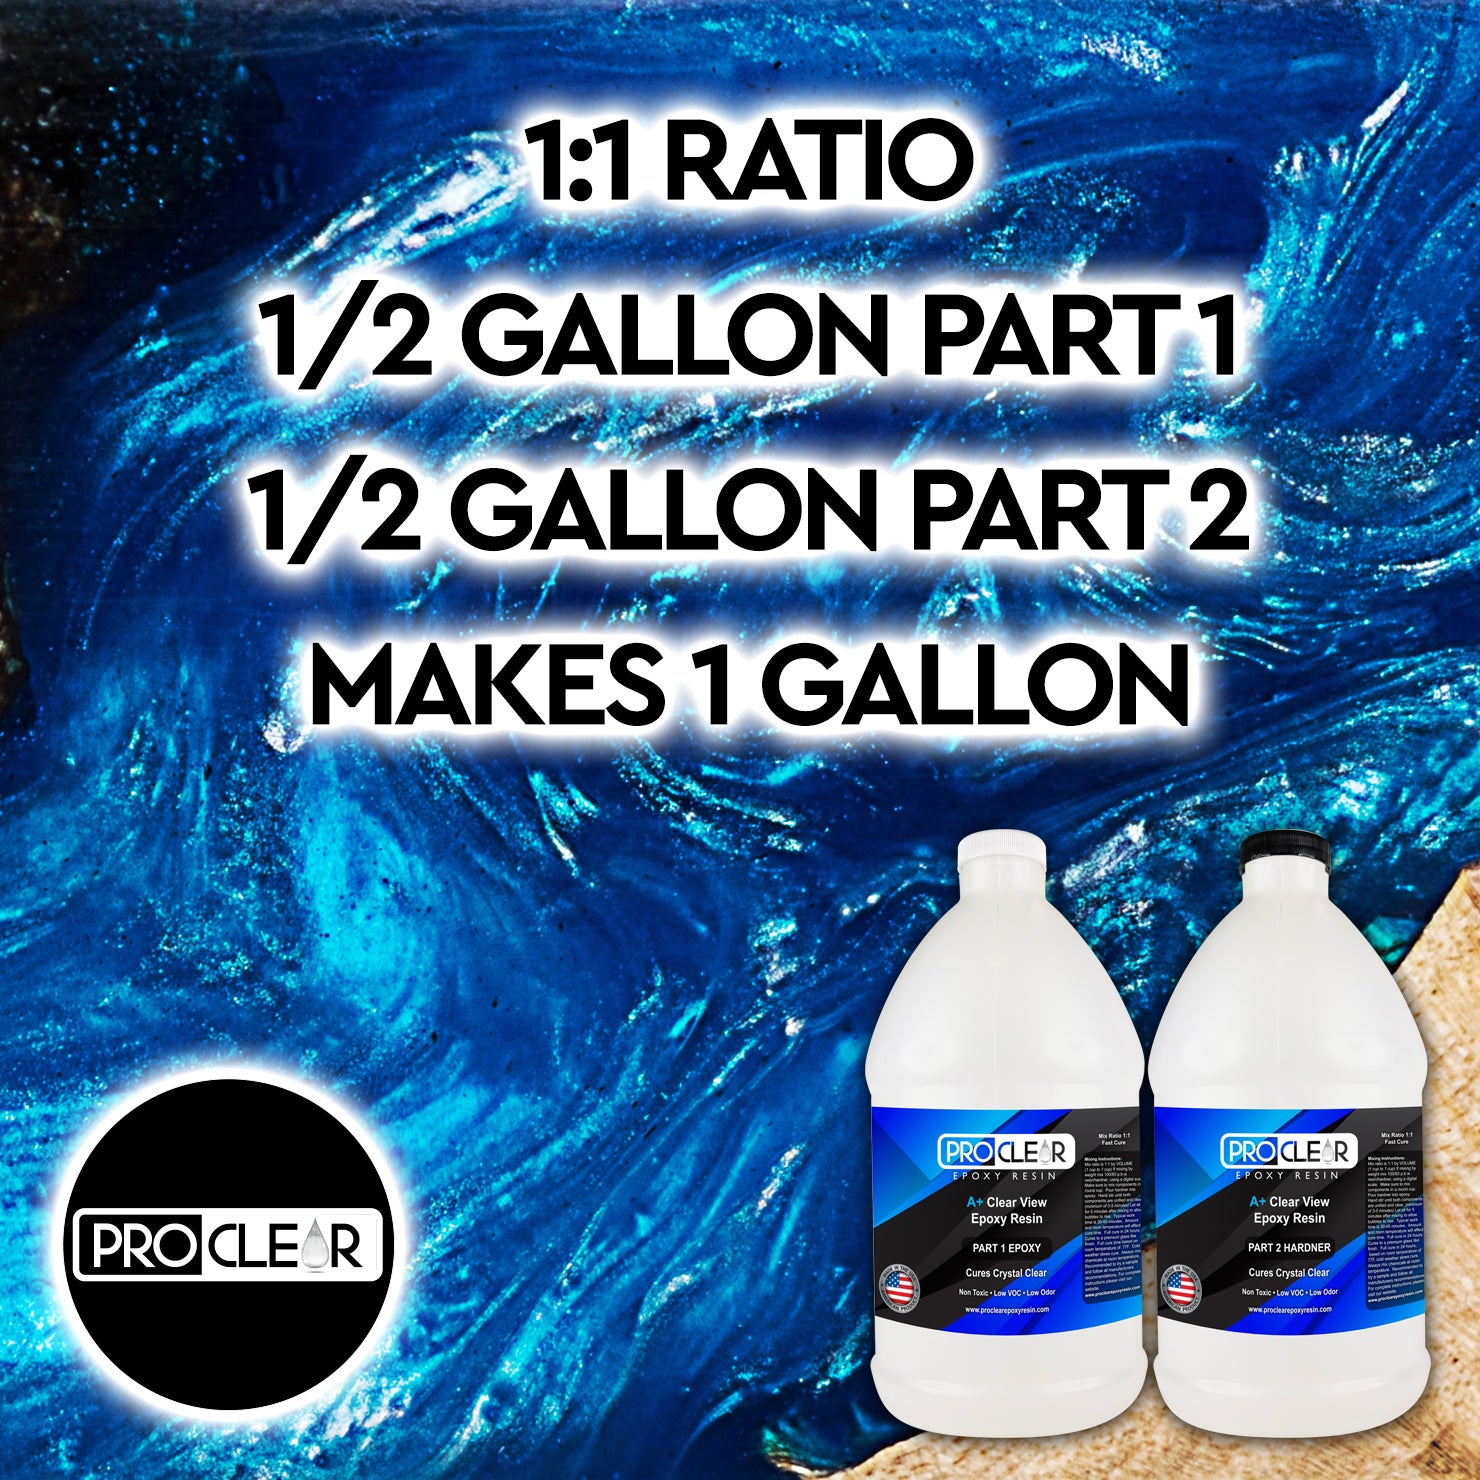 Crystal Clear Epoxy Resin 1 Gallon Kit Easy Mixing General Purpose Sup –  ProClear Epoxy Resin